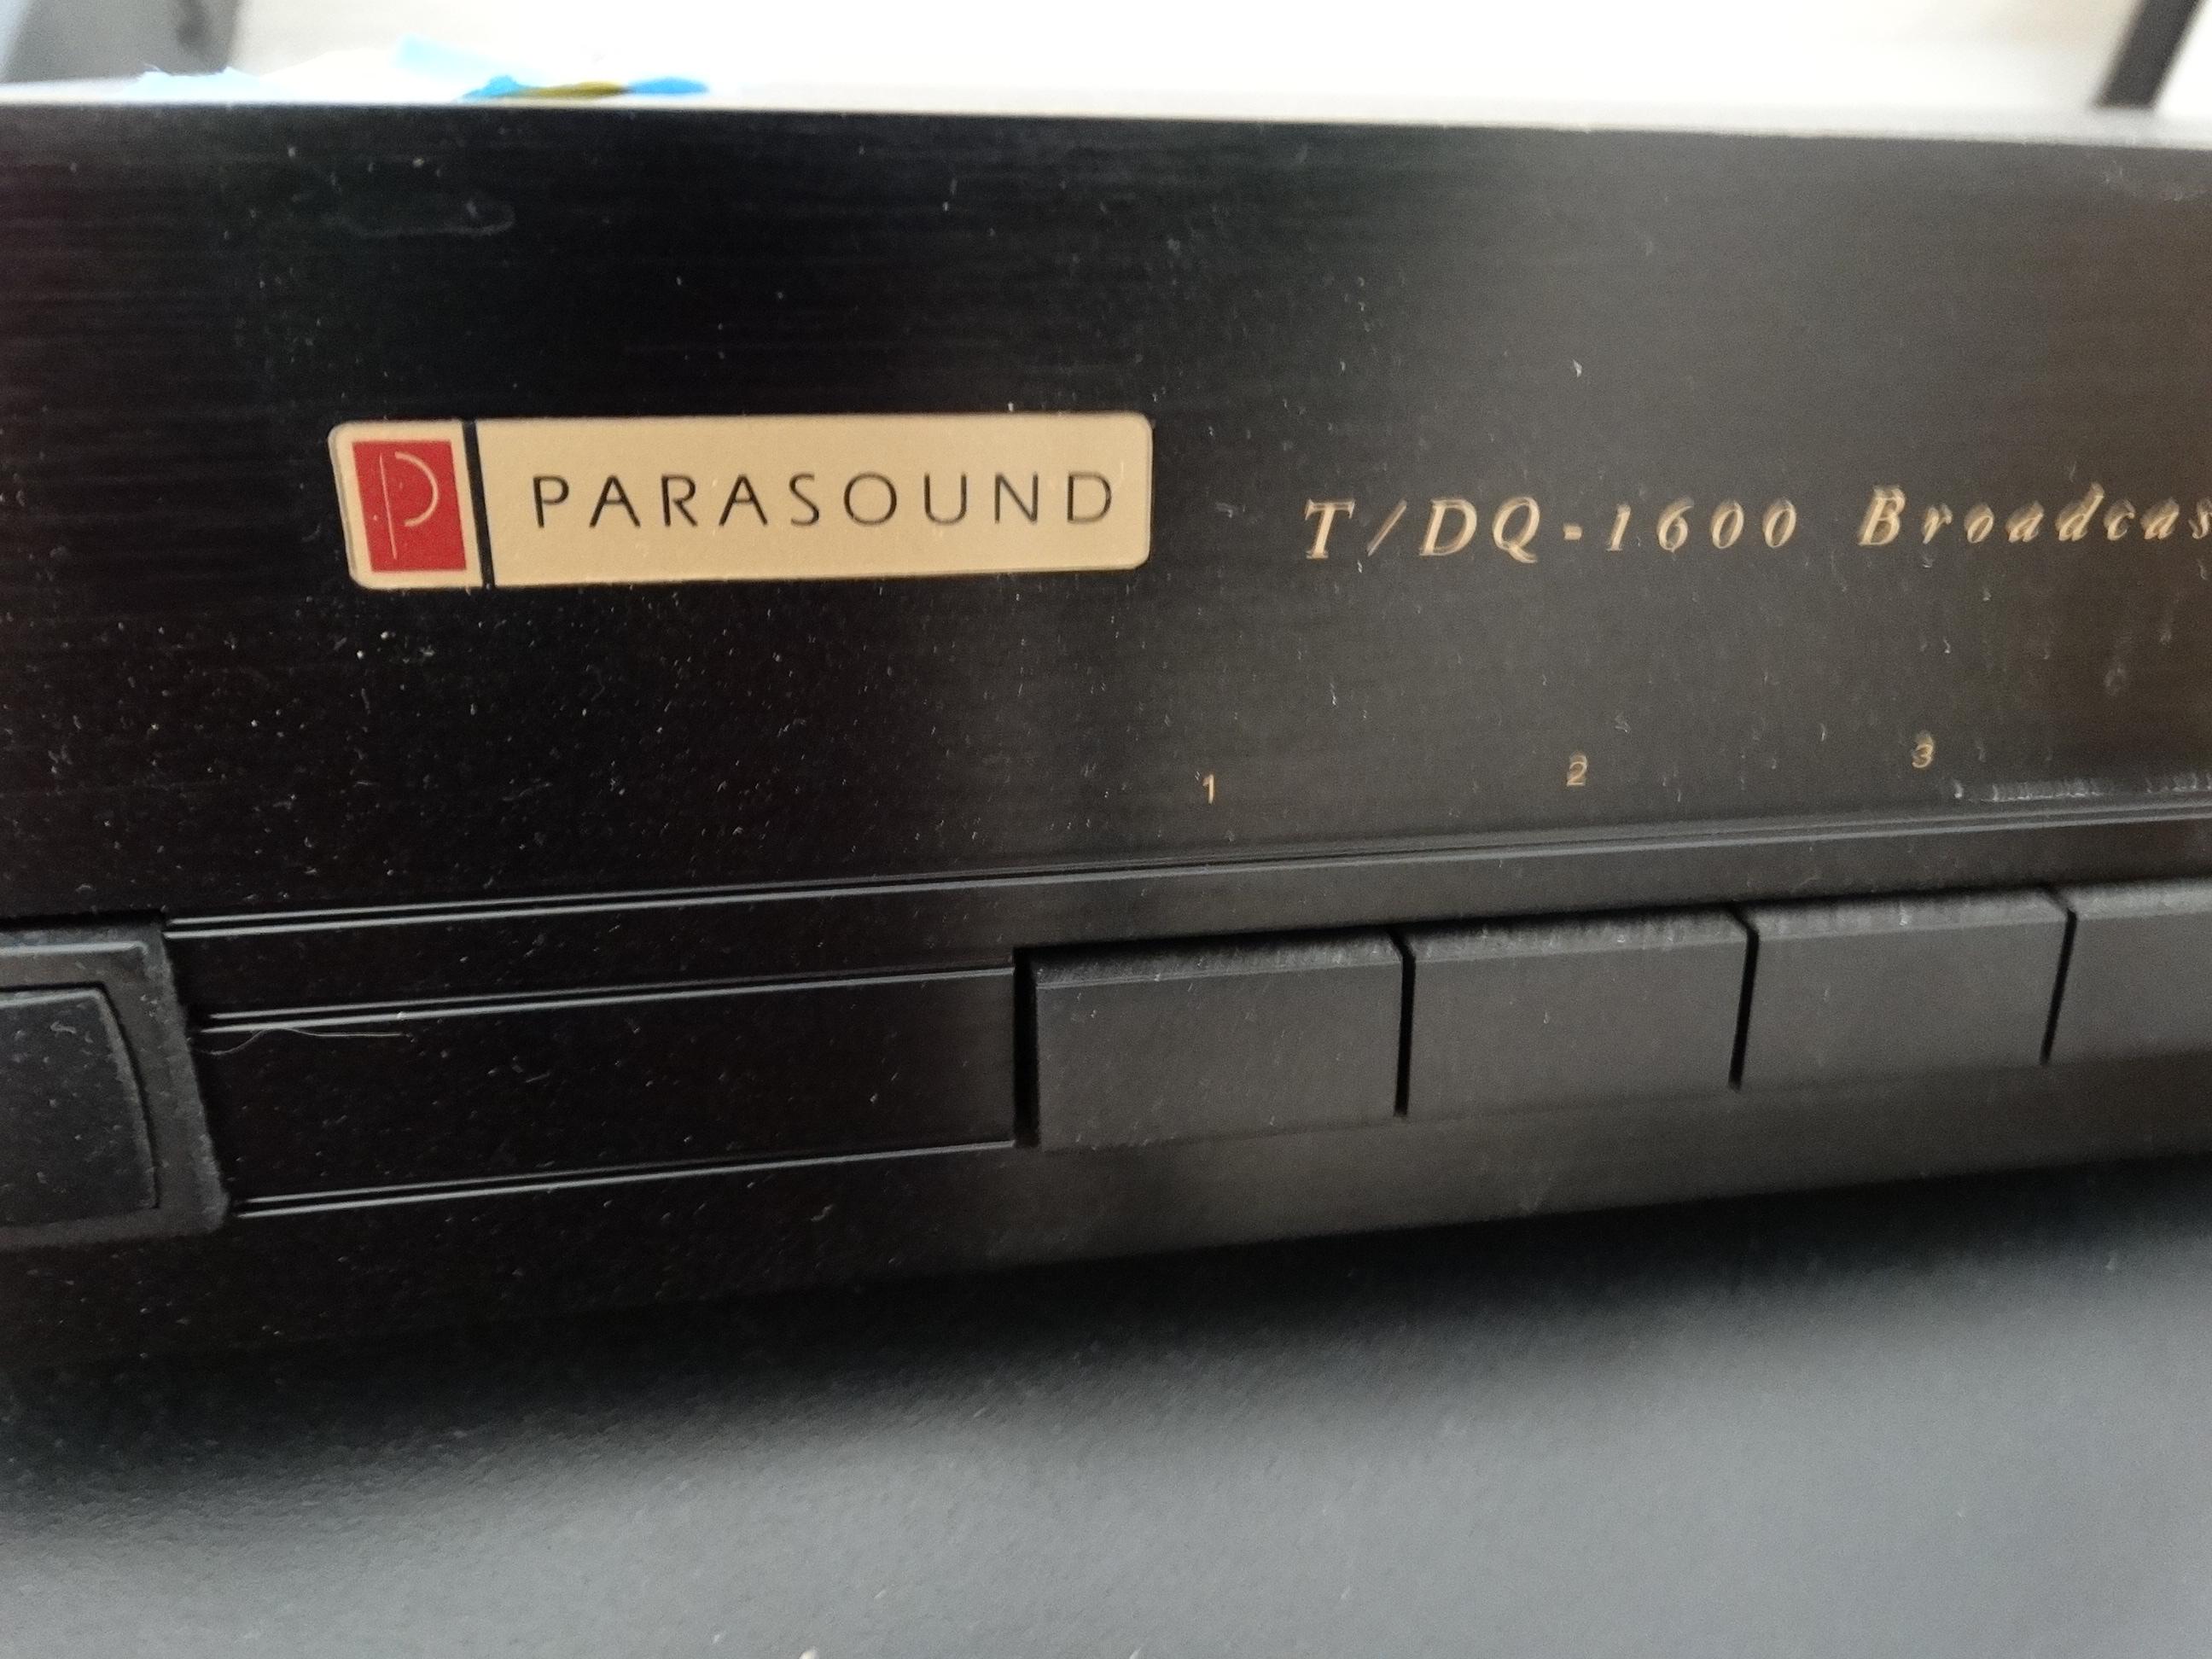 Parasound T/DQ 1600 Broadcast Reference Tuner